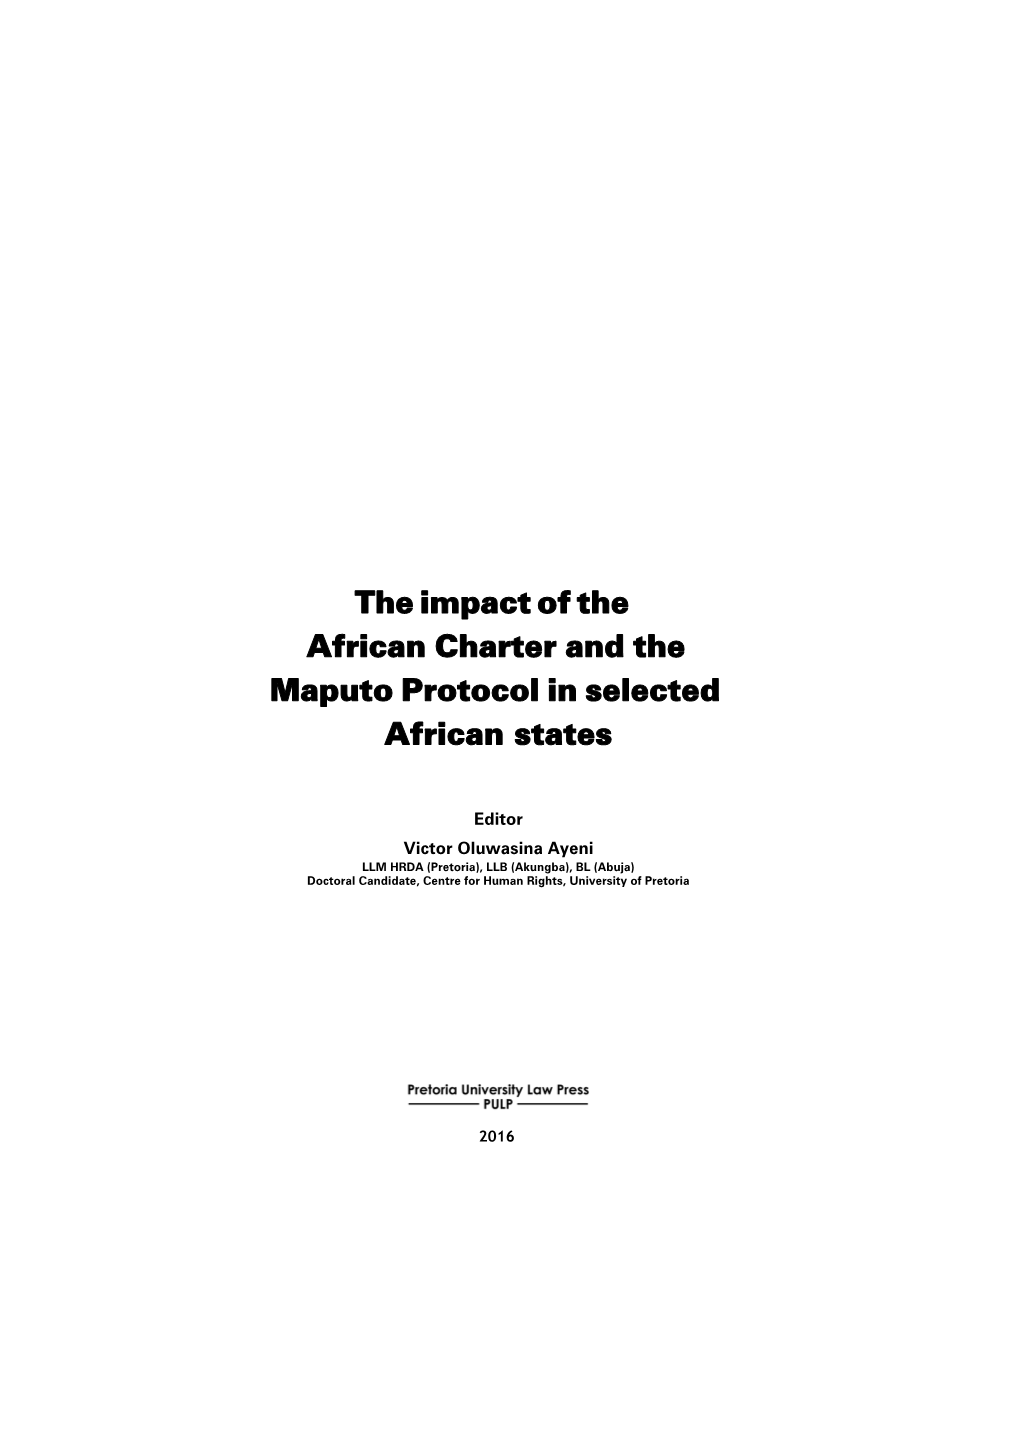 The Impact of the African Charter and the Maputo Protocol in Selected African States